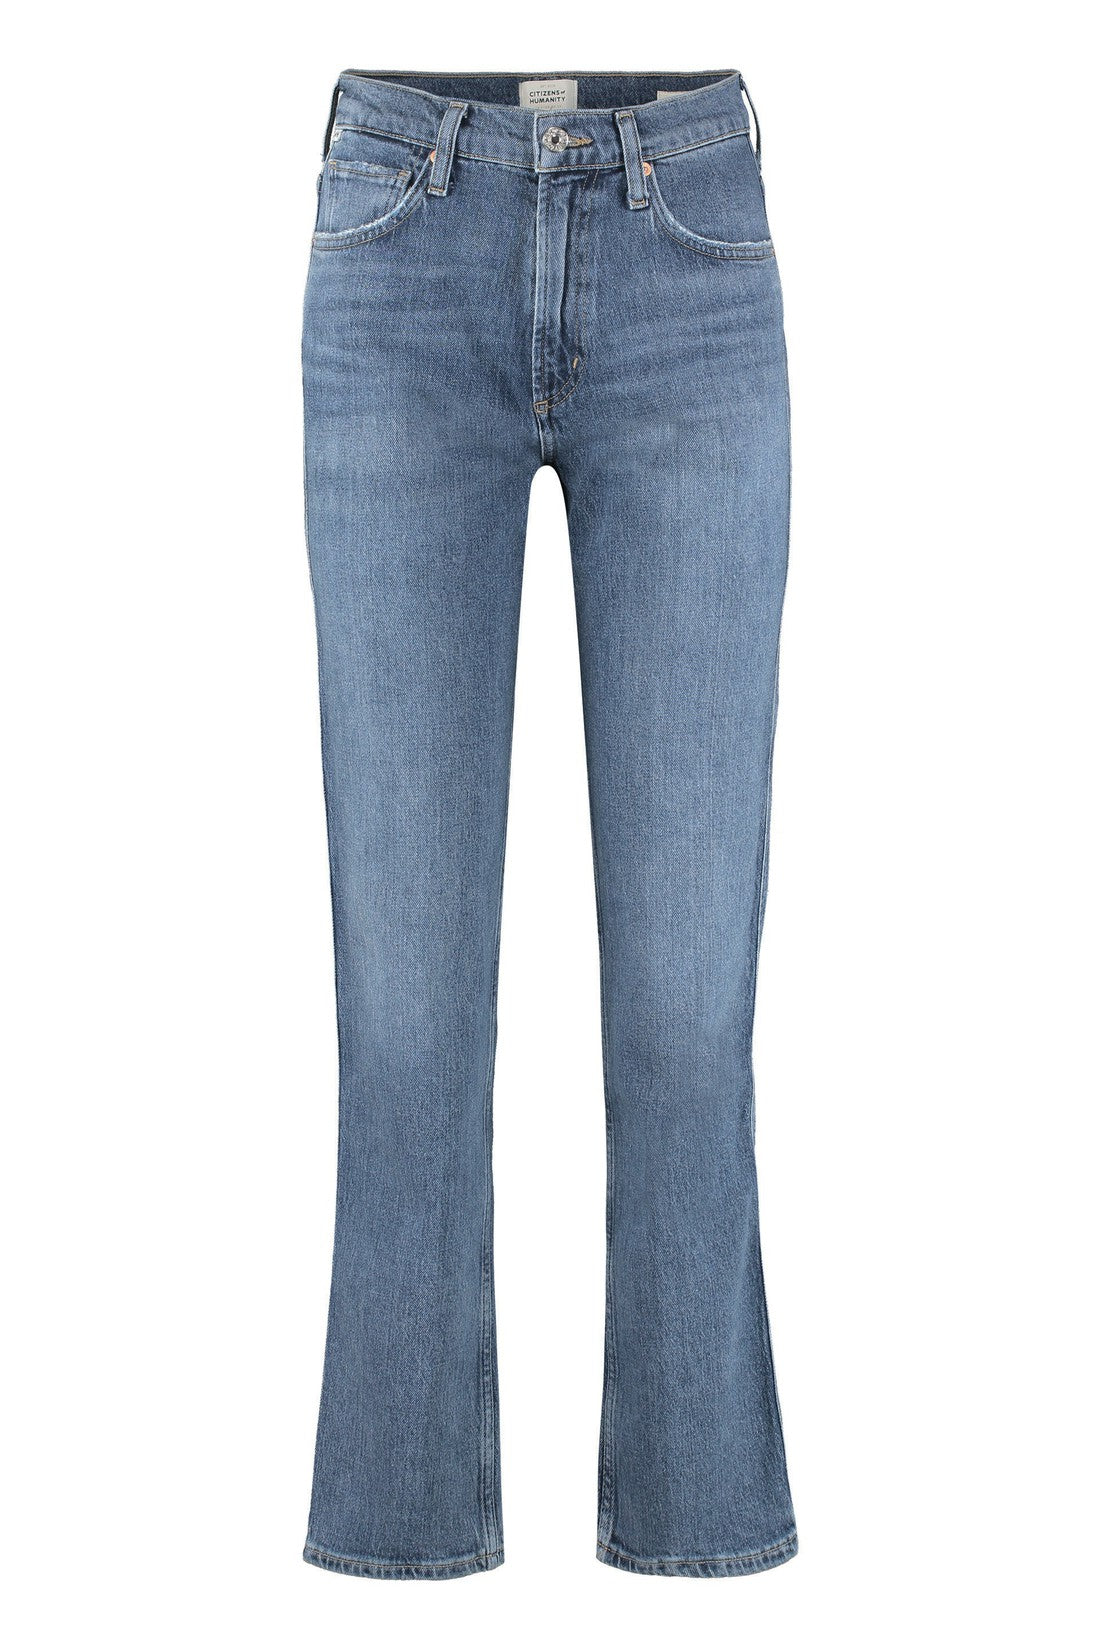 Citizens of Humanity-OUTLET-SALE-Daphne stovepipe jeans-ARCHIVIST